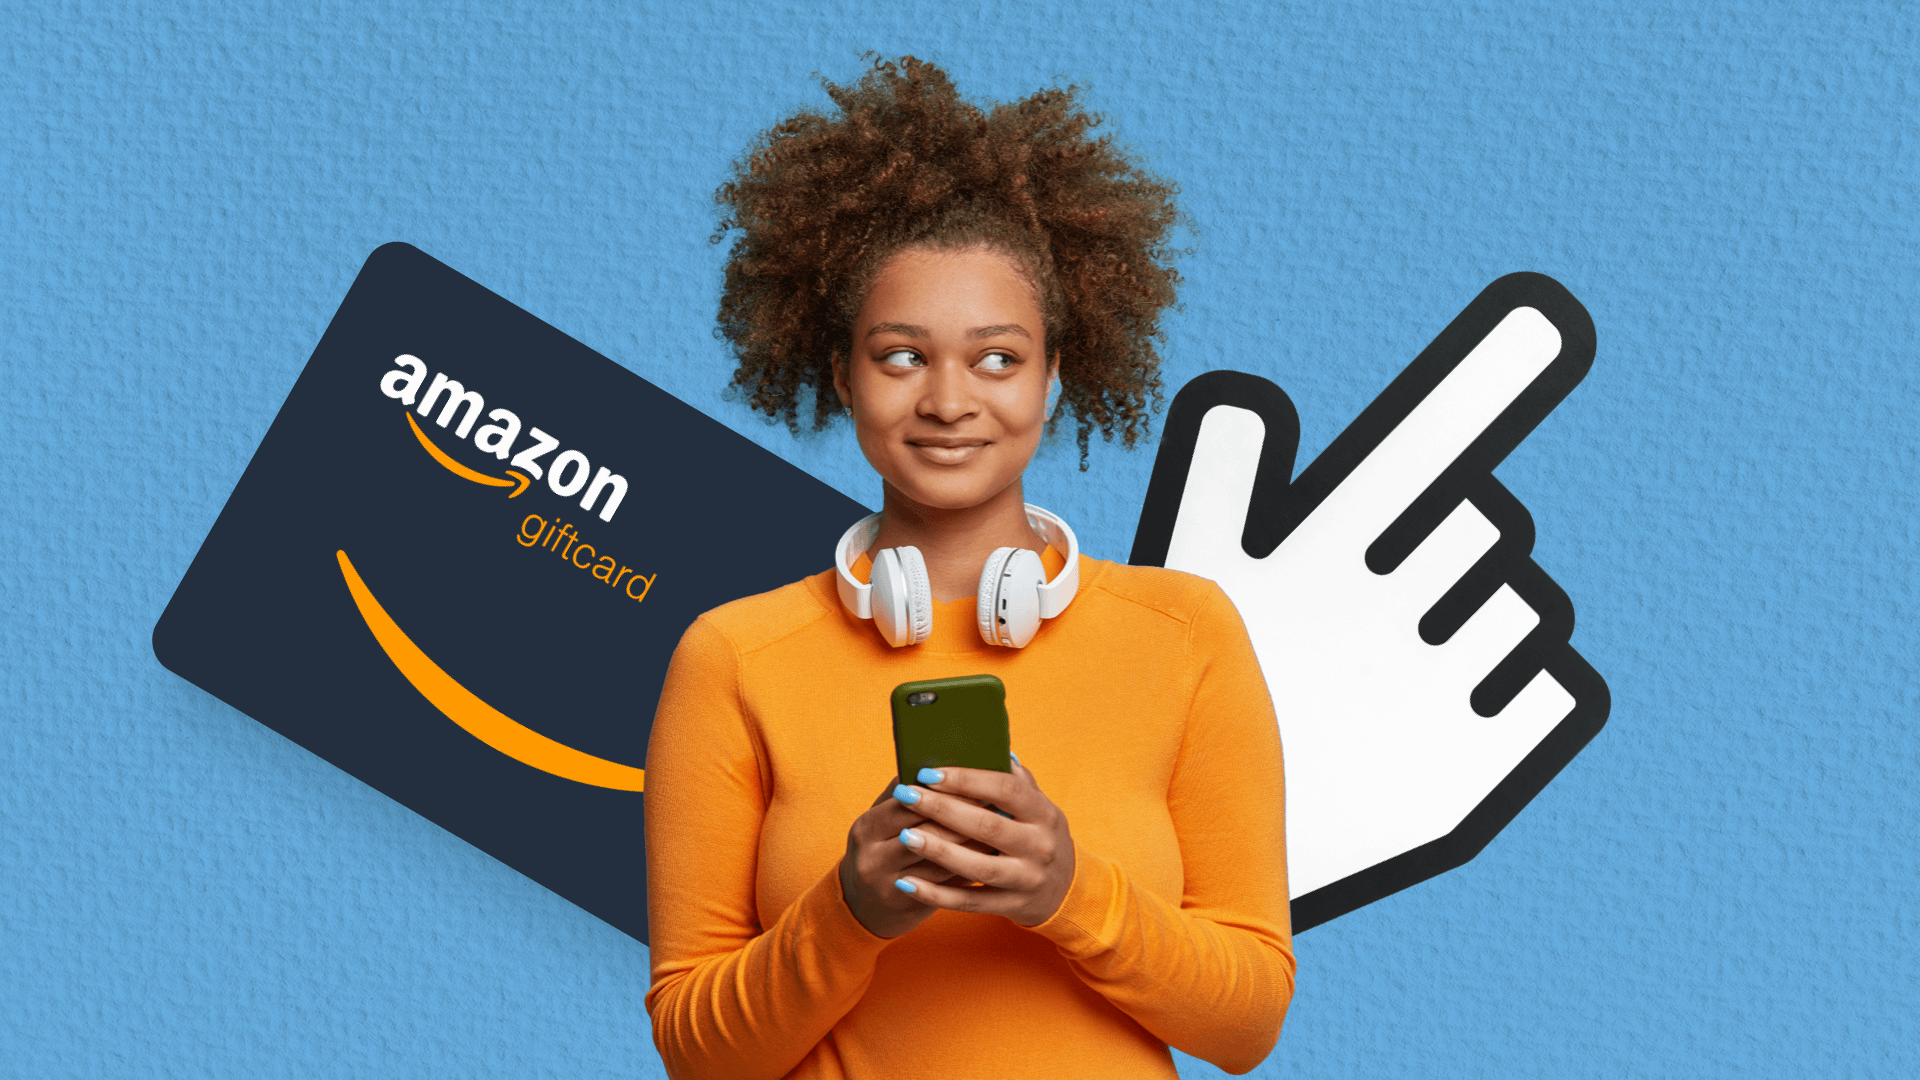 Can You Use PayPal on Amazon? Not Directly